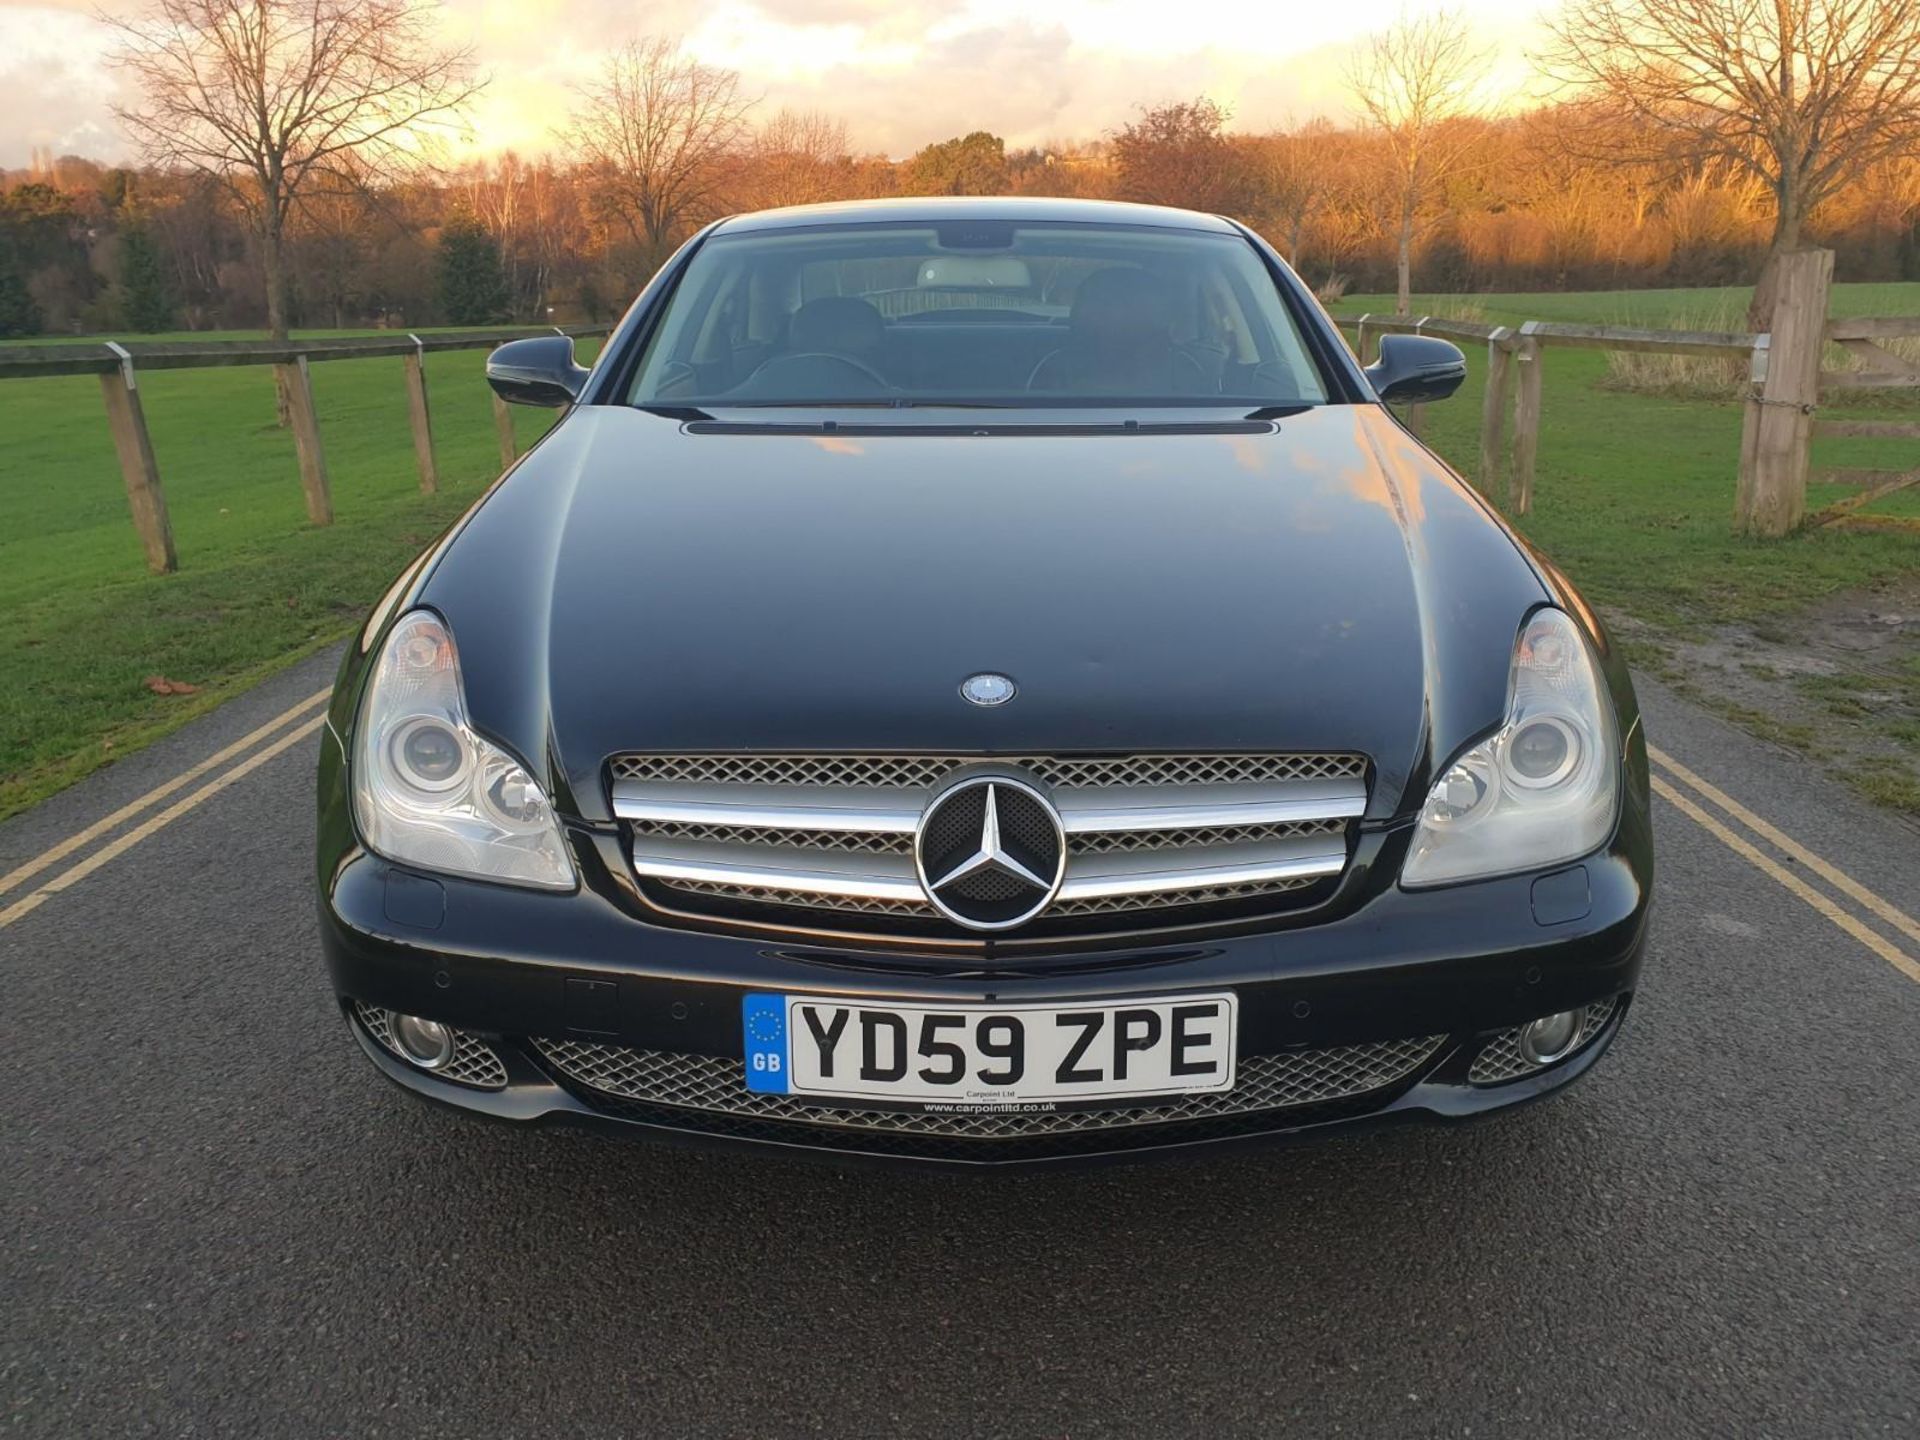 2009/59 REG MERCEDES-BENZ CLS350 CDI AUTO BLACK DIESEL COUPE, SHOWING 2 FORMER KEEPERS *NO VAT* - Image 2 of 12